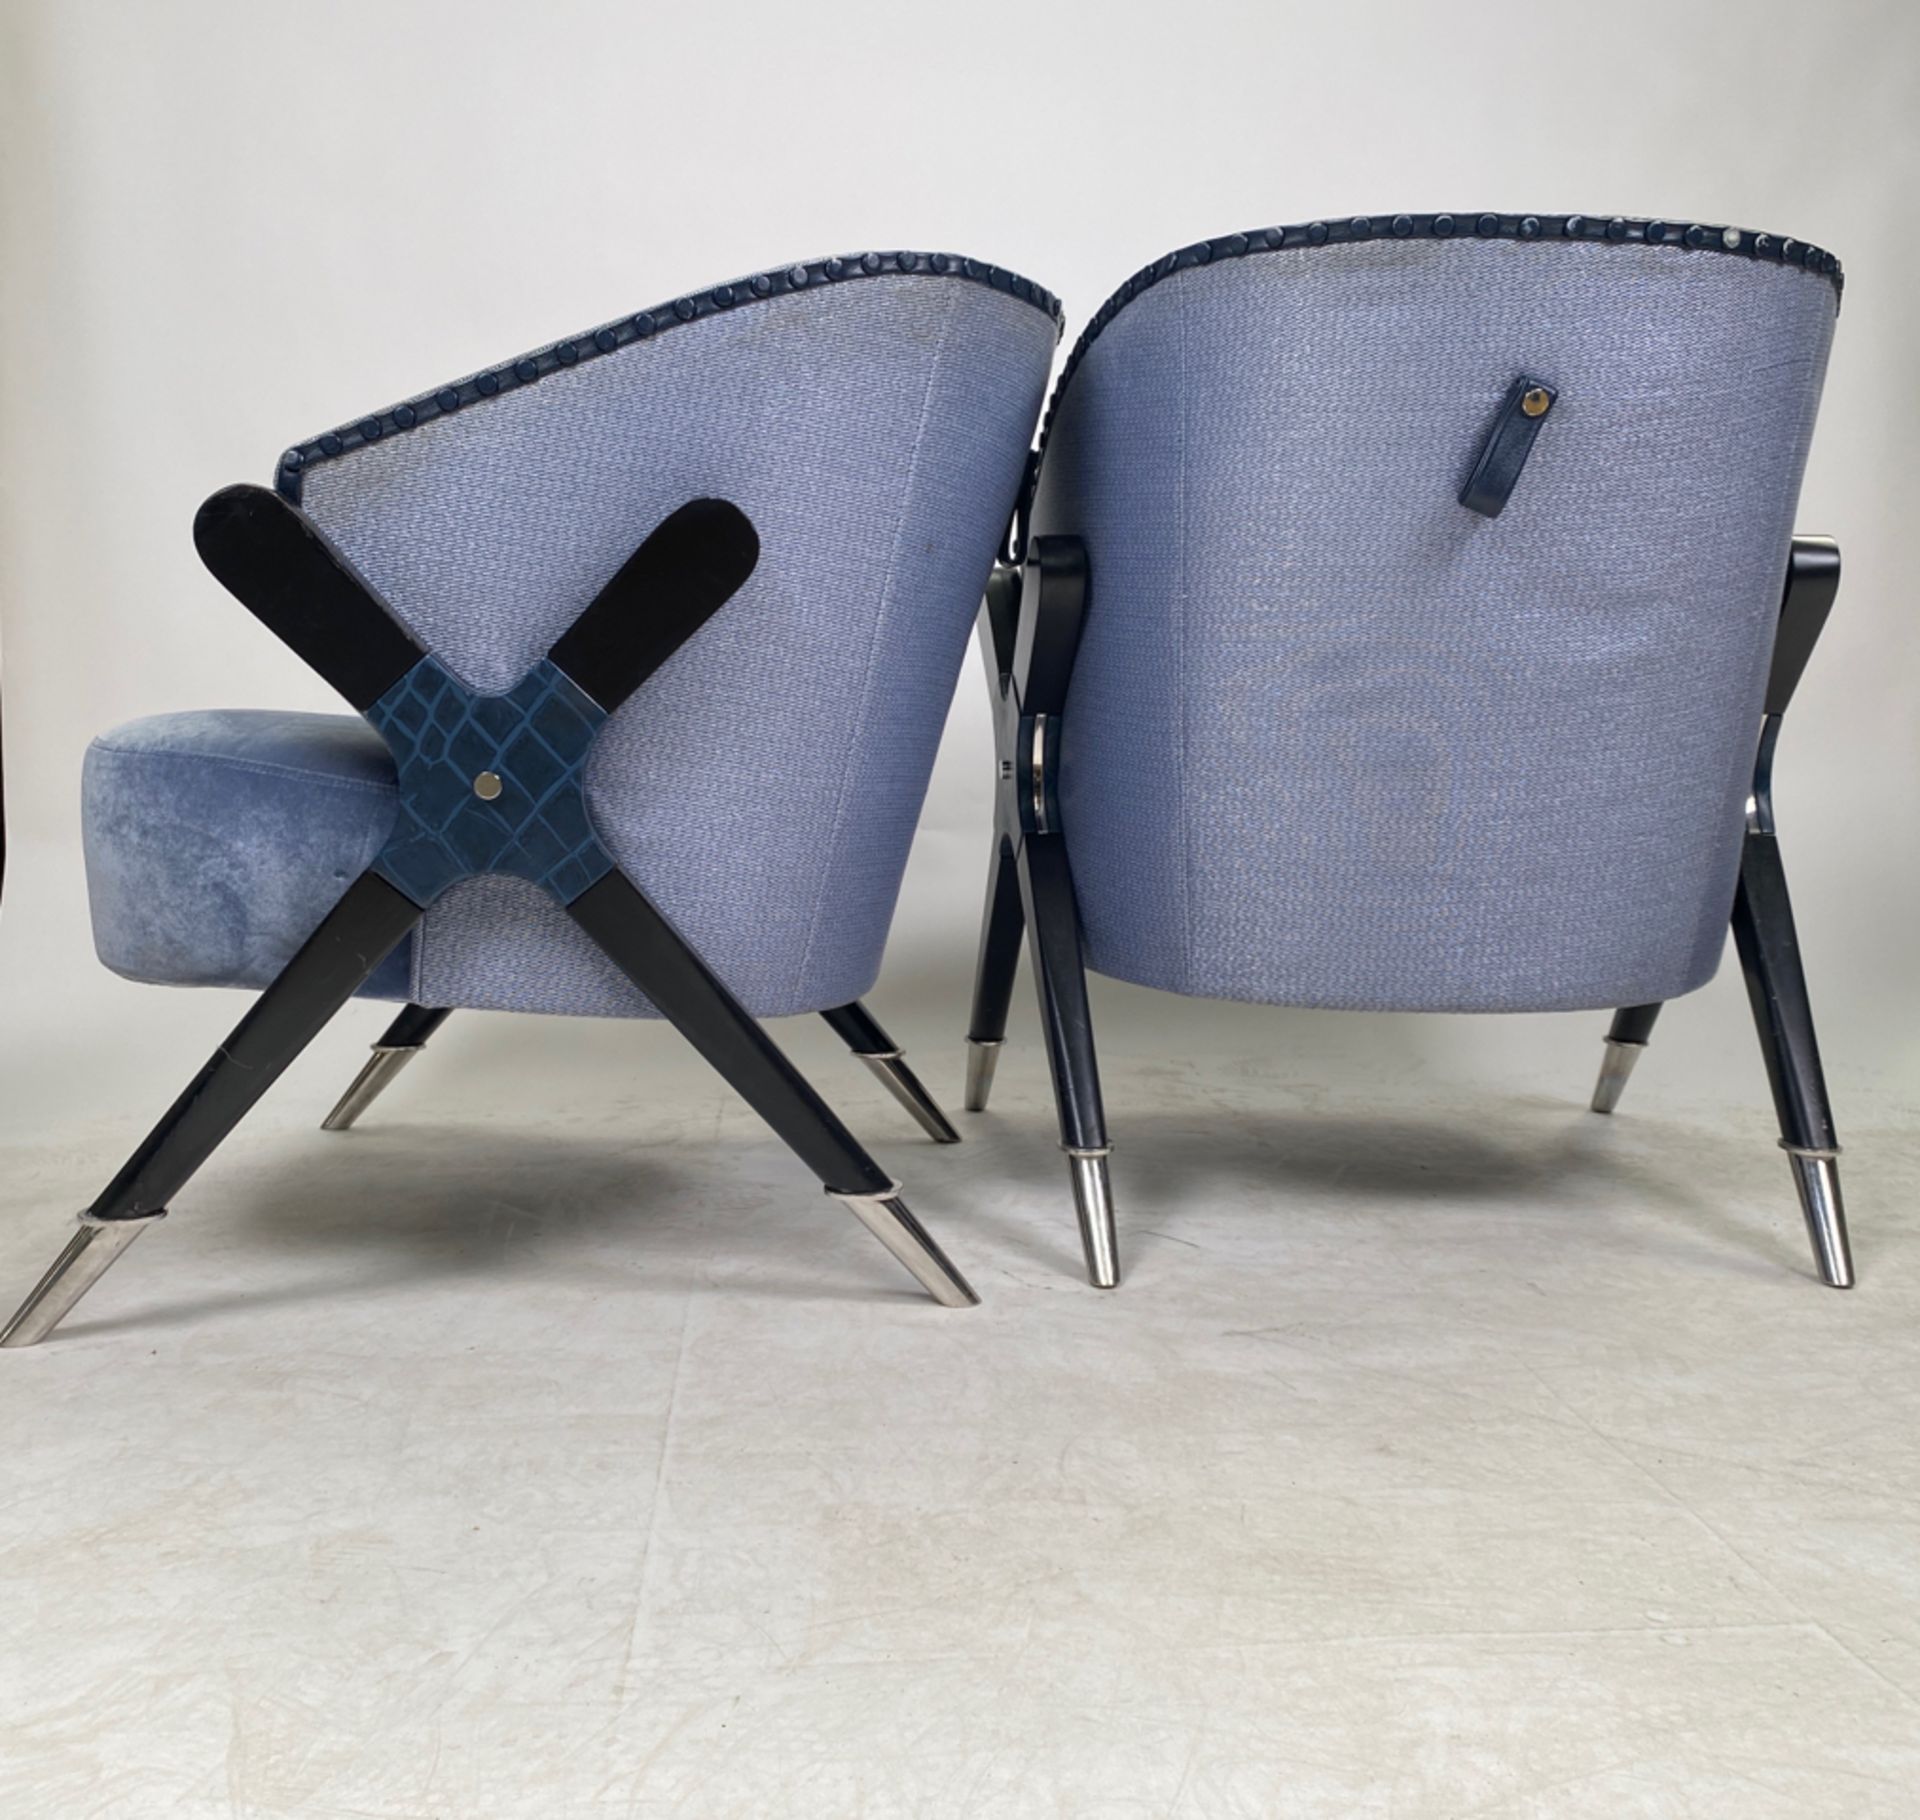 Bespoke Pair of Ben Whistler Chairs Commissioned by Robert Angell Design for The Berkeley Blue Bar - Image 3 of 5